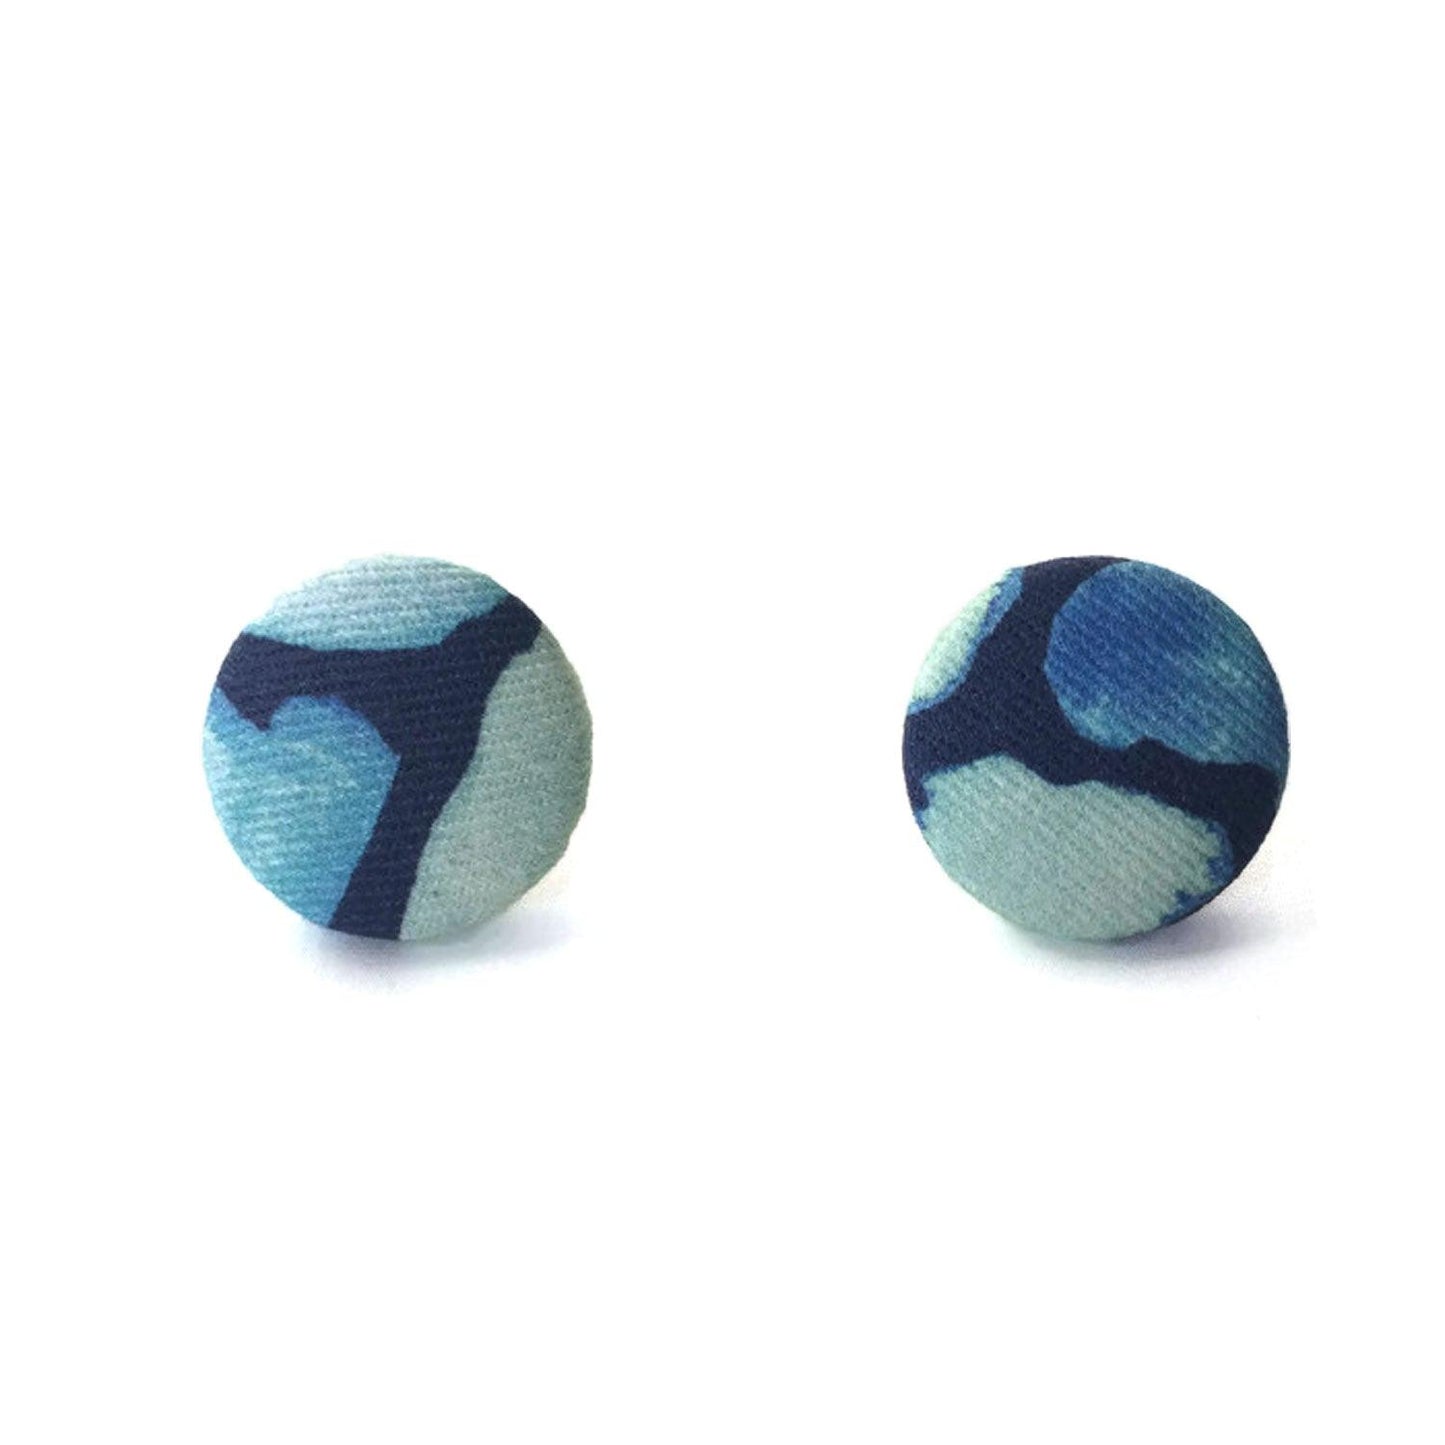 Fabric Covered Button Earrings With Geo Pattern - OlaOla